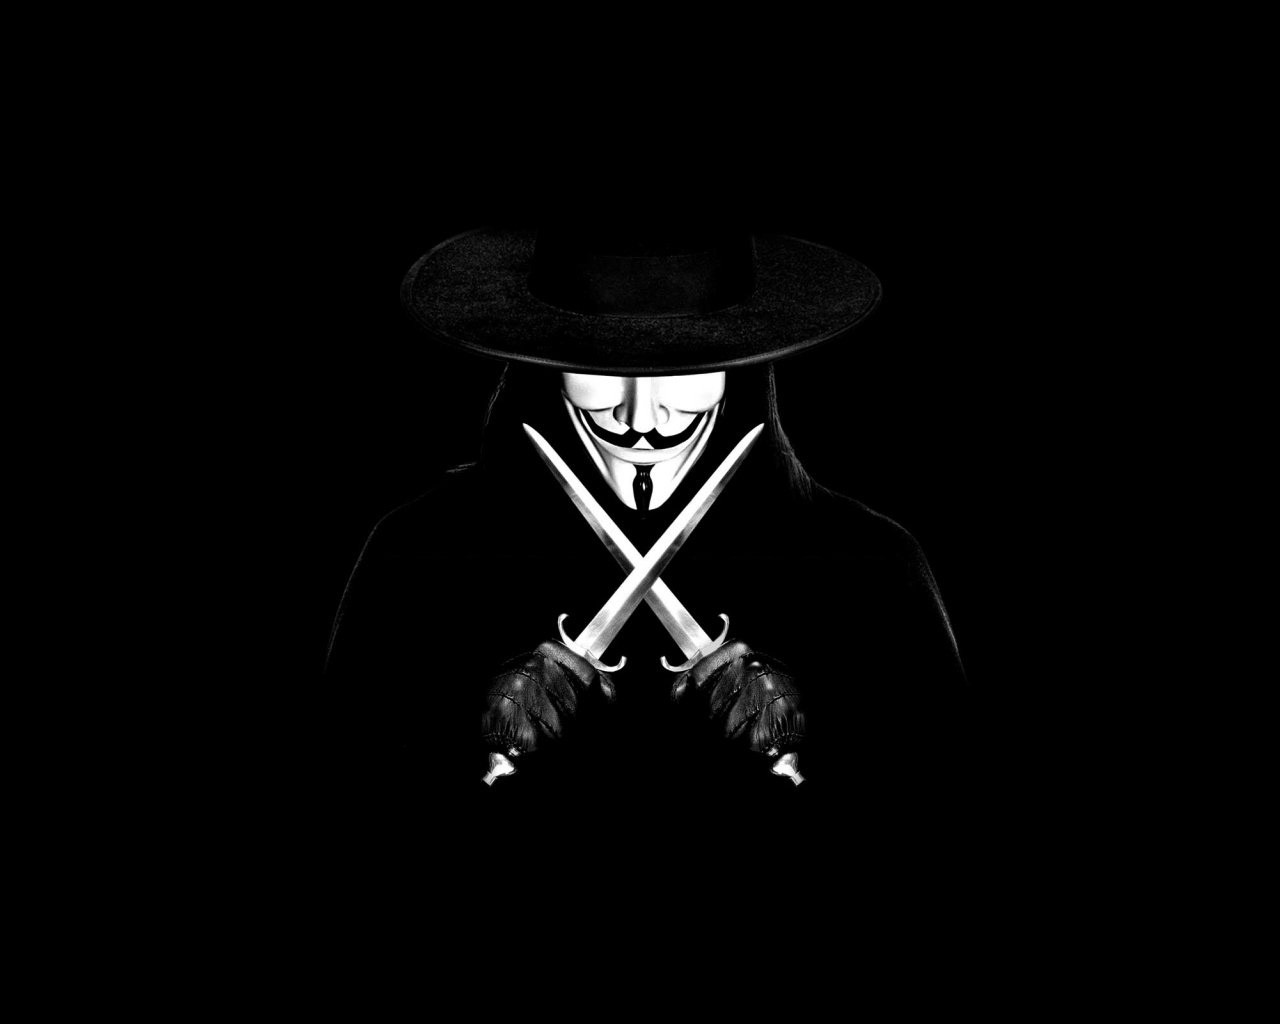 General 1280x1024 V for Vendetta Guy Fawkes monochrome simple background movies black background